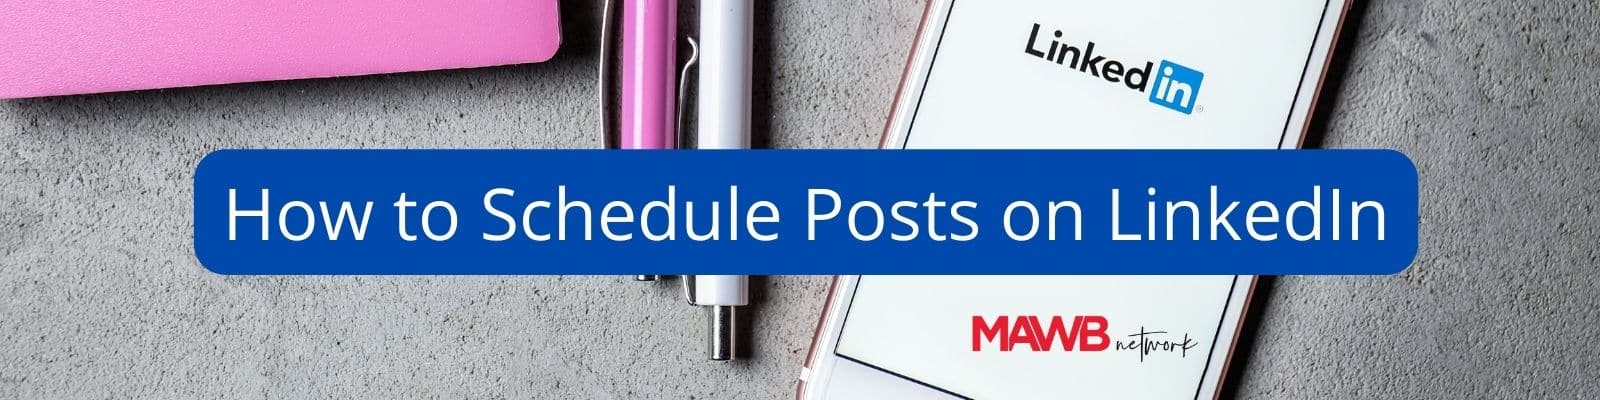 How to Schedule Posts on LinkedIn